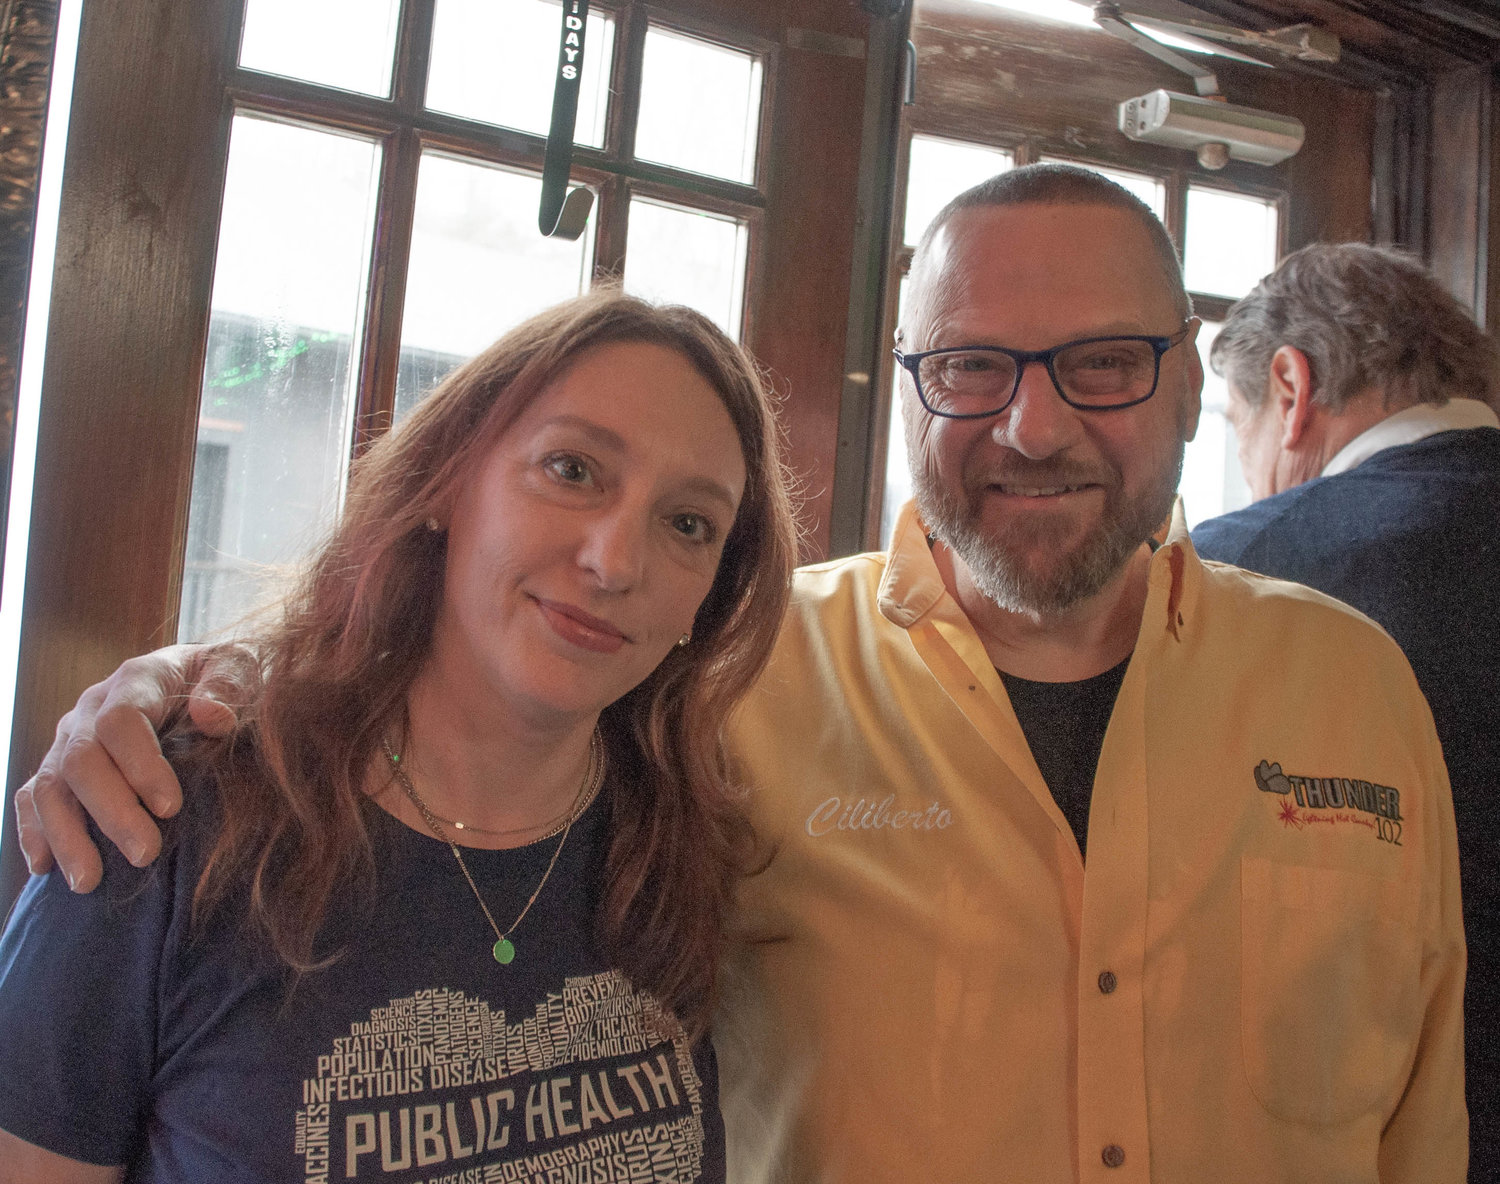 Celebrity bartender and acting director of Sullivan County Public Health Karen Holden joined Thunder 102 Radio's Paul Ciliberto at the Callicoon Brewing Company pub last Saturday to raise funds for St Jude Children's Research Hospital.